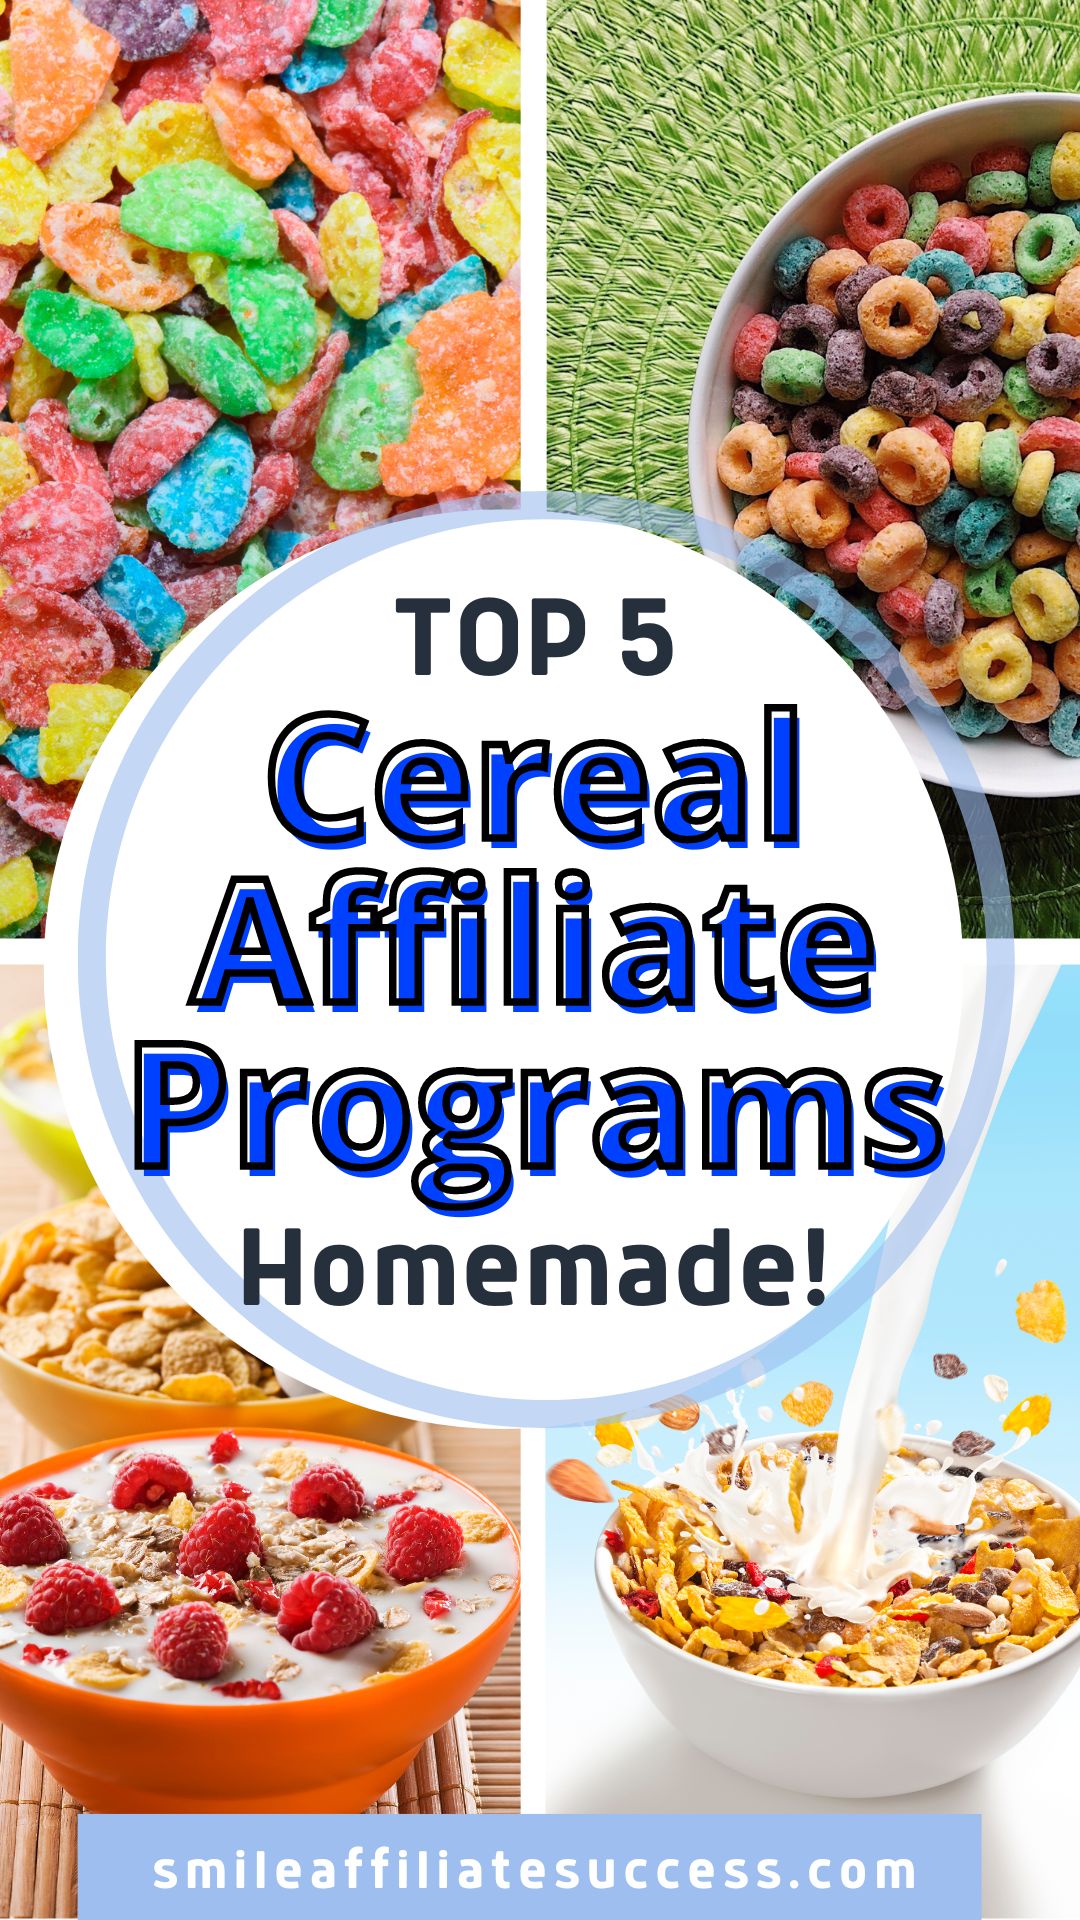 Top 5 Cereal Affiliate Programs